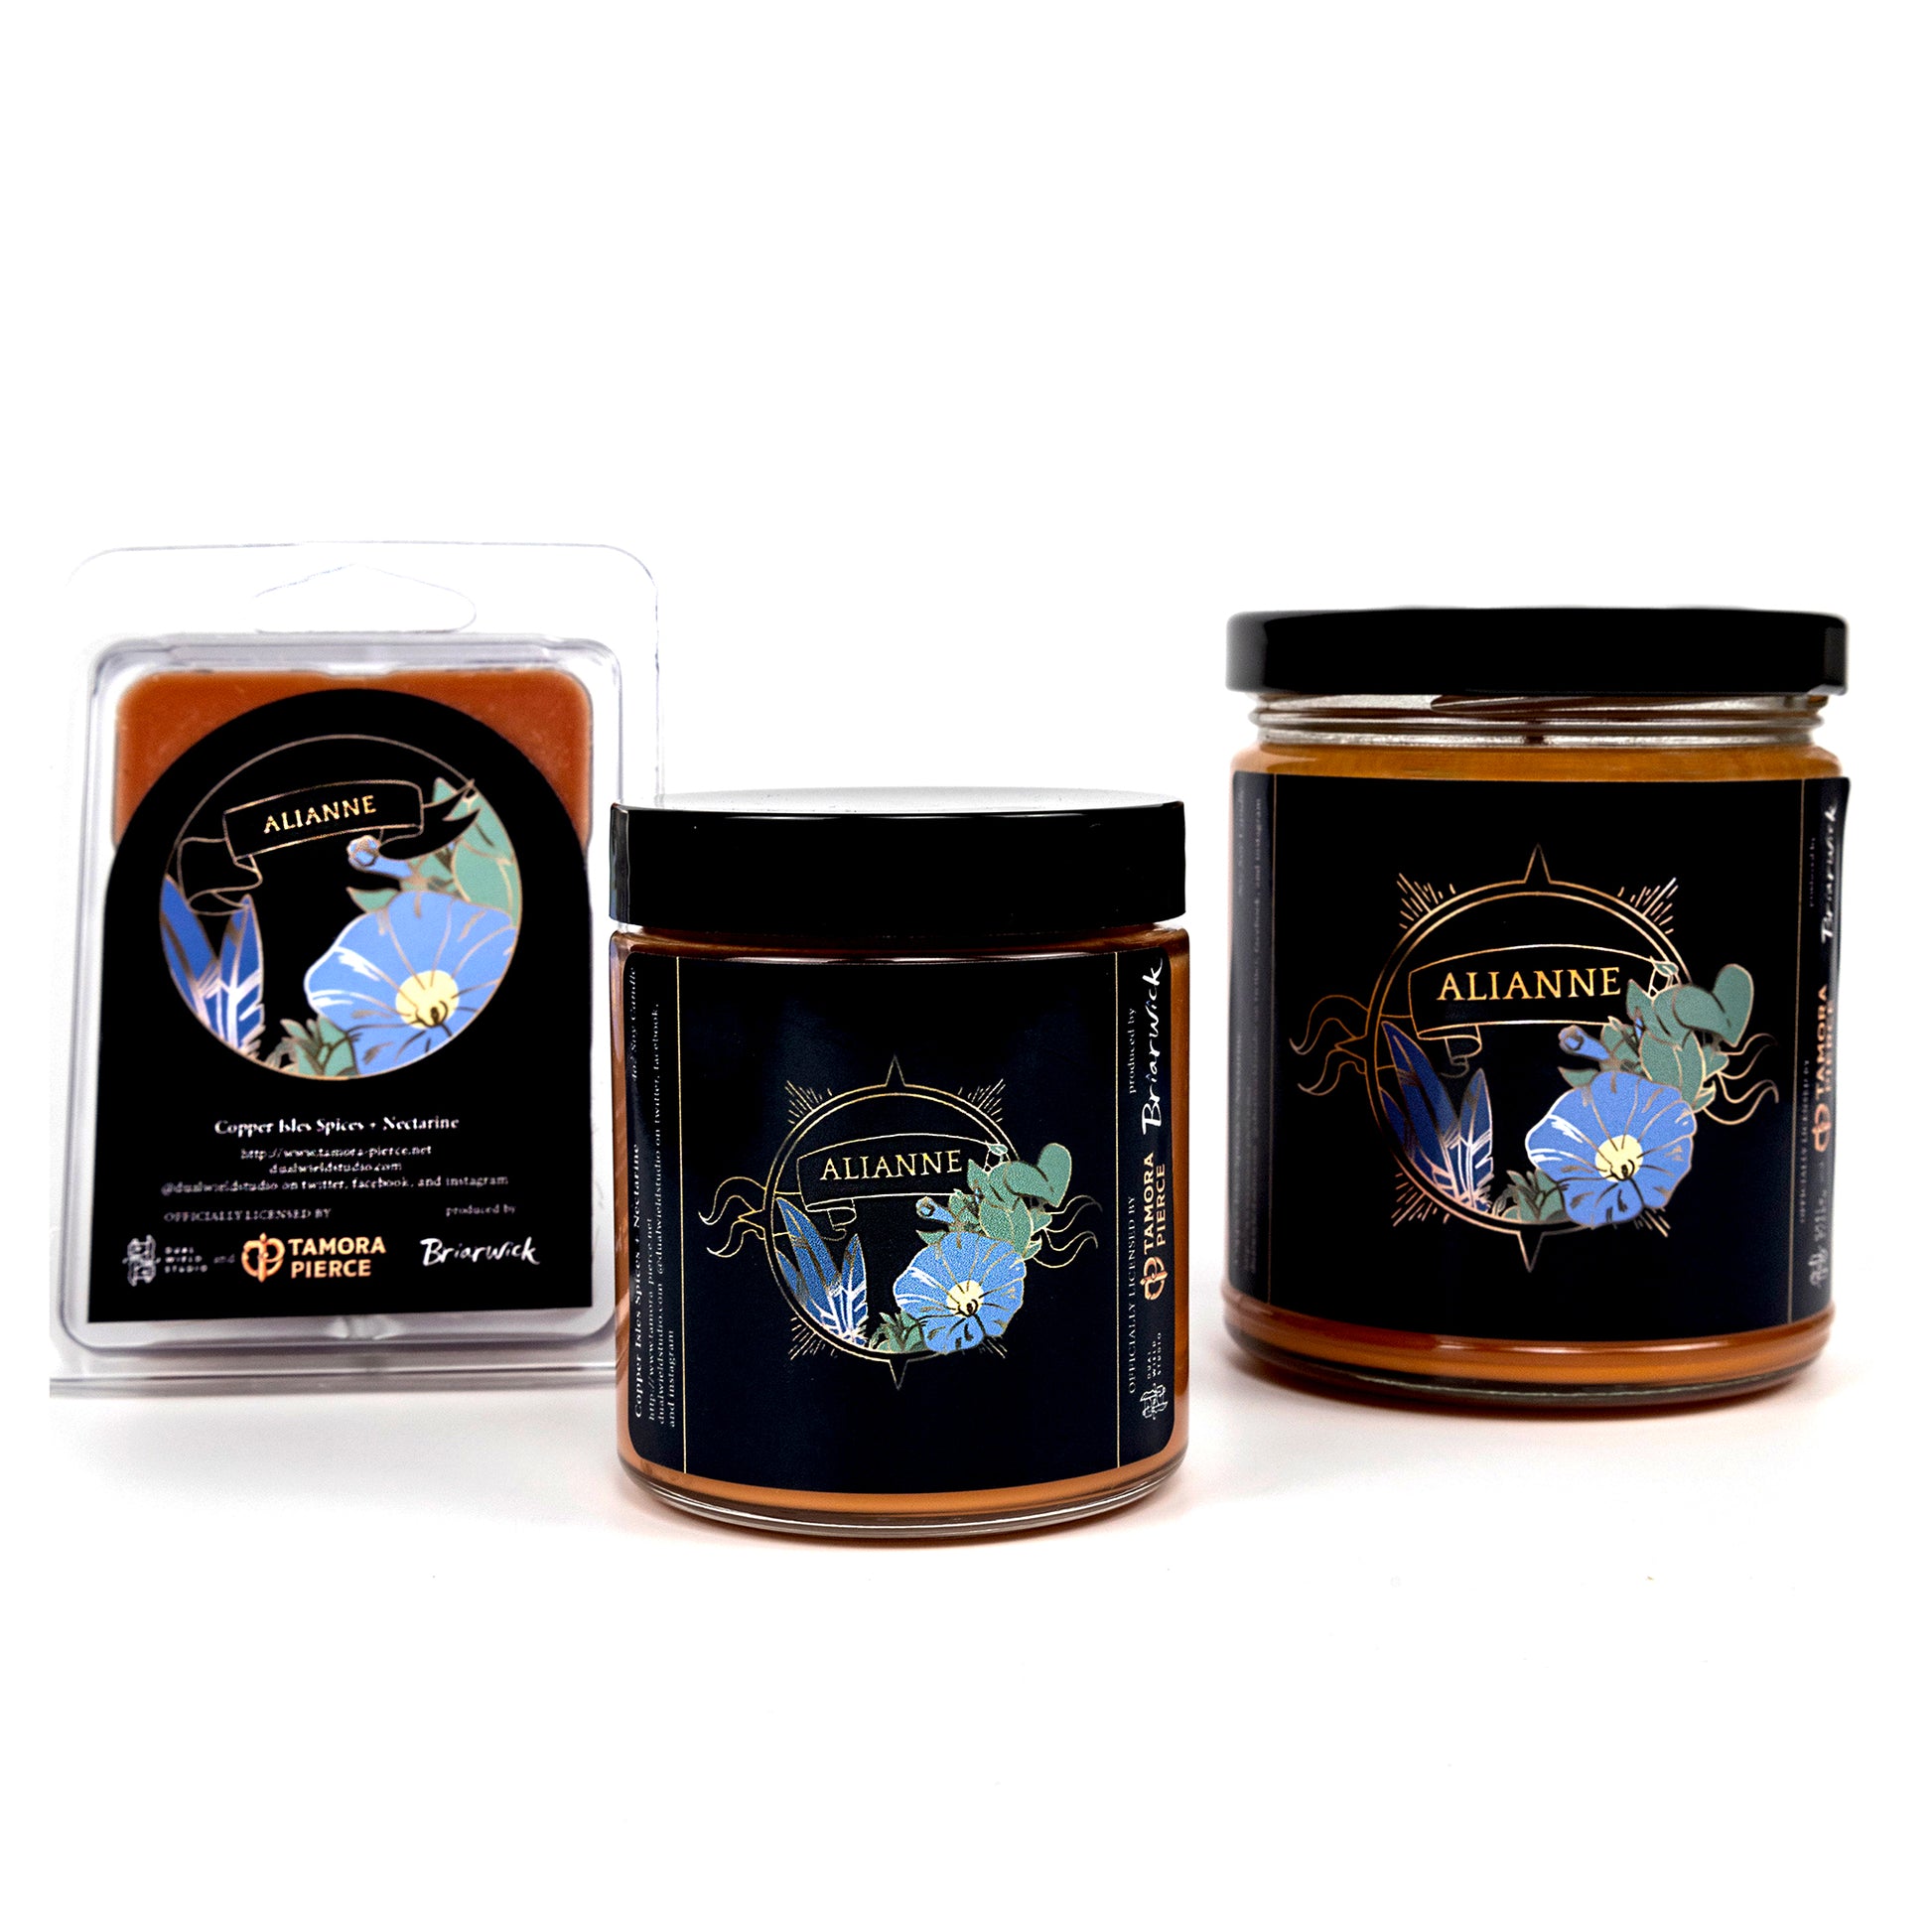 Full set of both Alianne candles and wax melts, all with orange wax. The labels show illustrations of blue feathers, blue morning glory and leaves within a golden circle with "Alianne" written on a ribbon across the top.